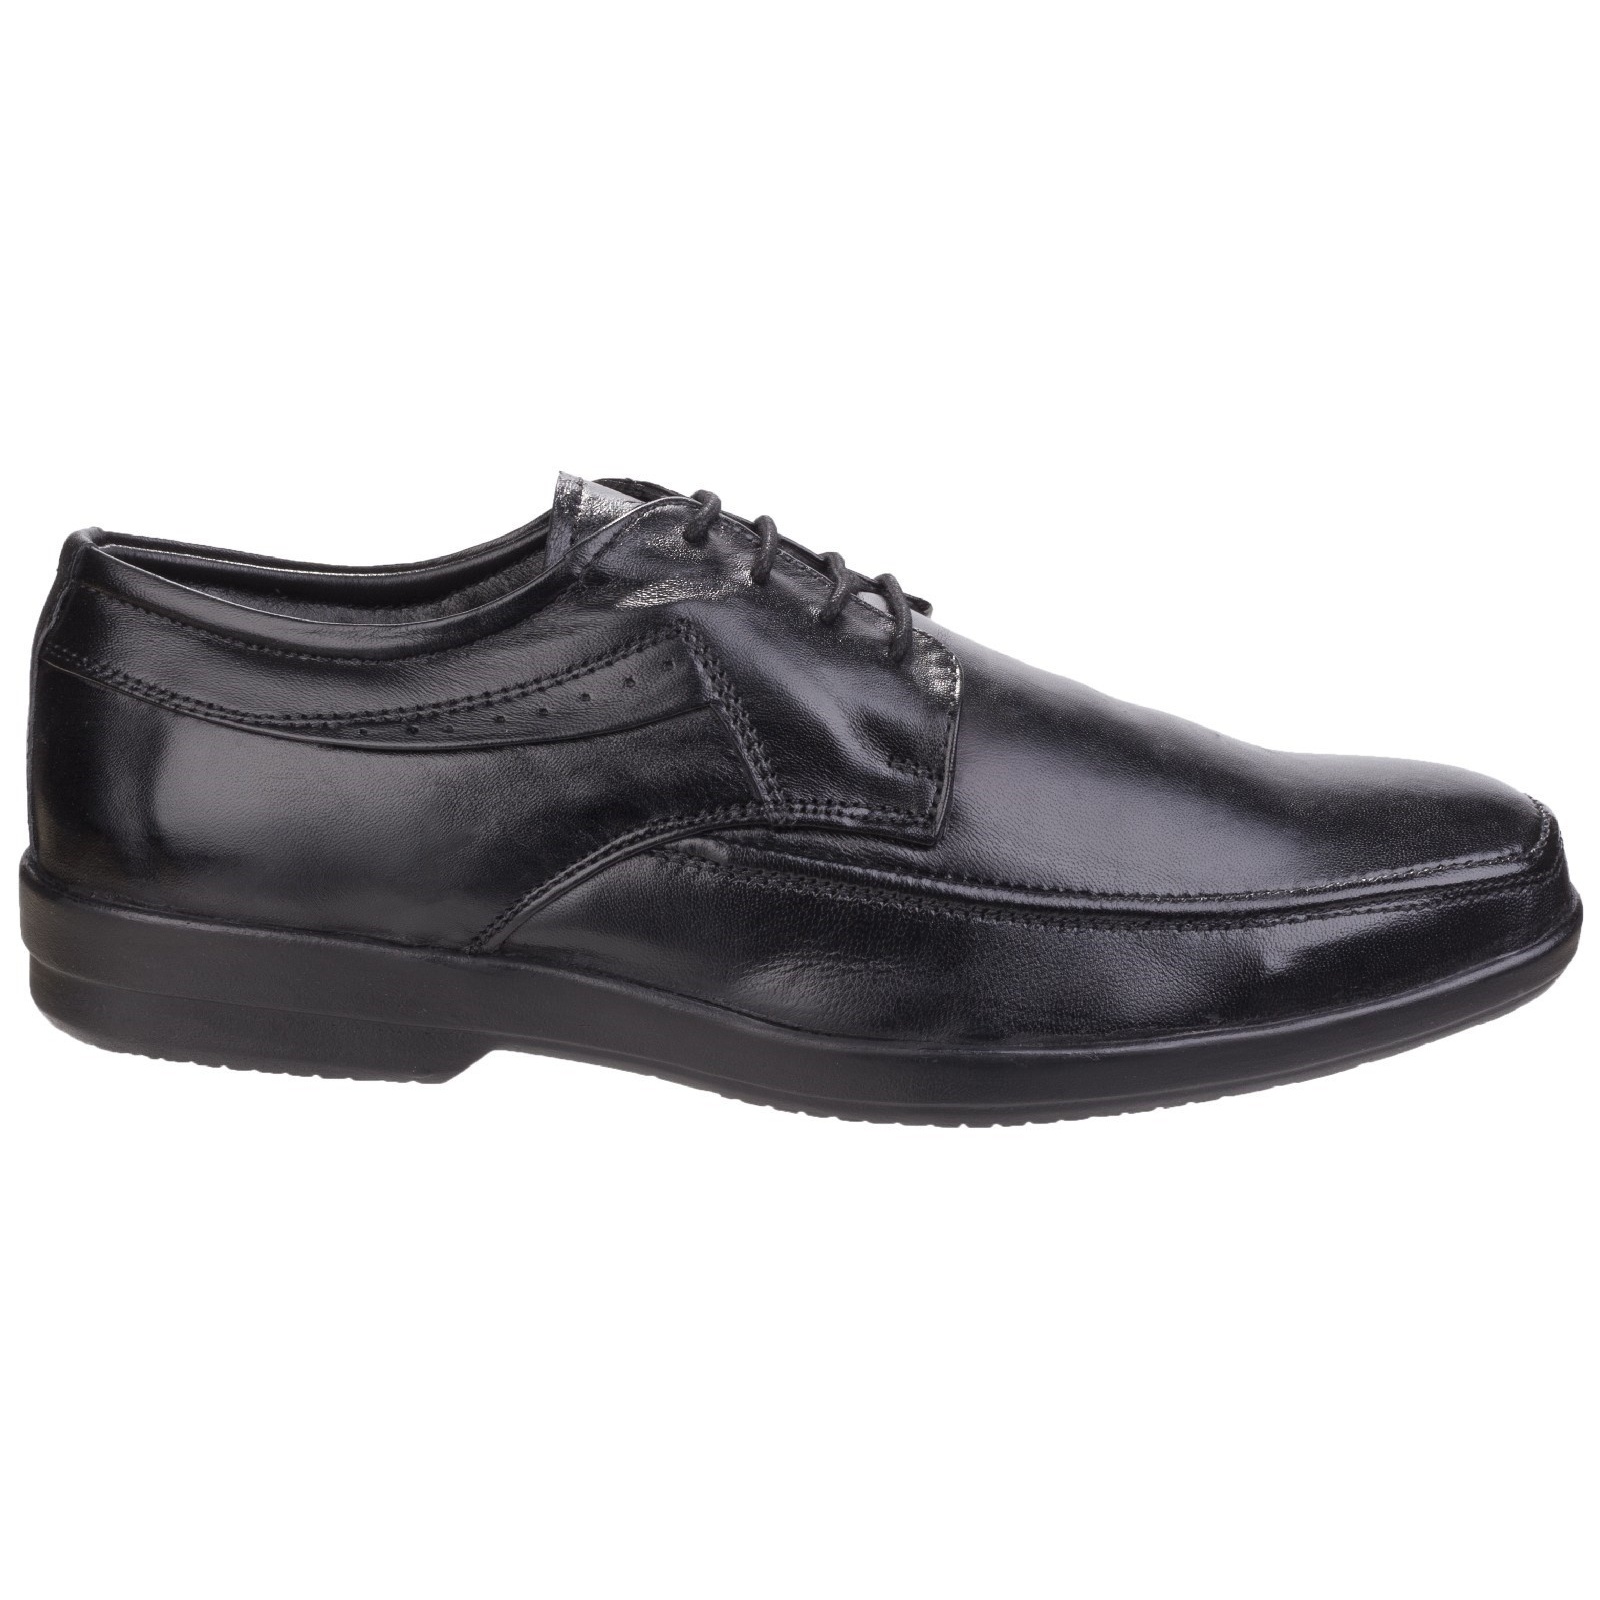 Fleet & Foster Mens Dave Apron Toe Oxford Formal Shoes - image 2 of 6